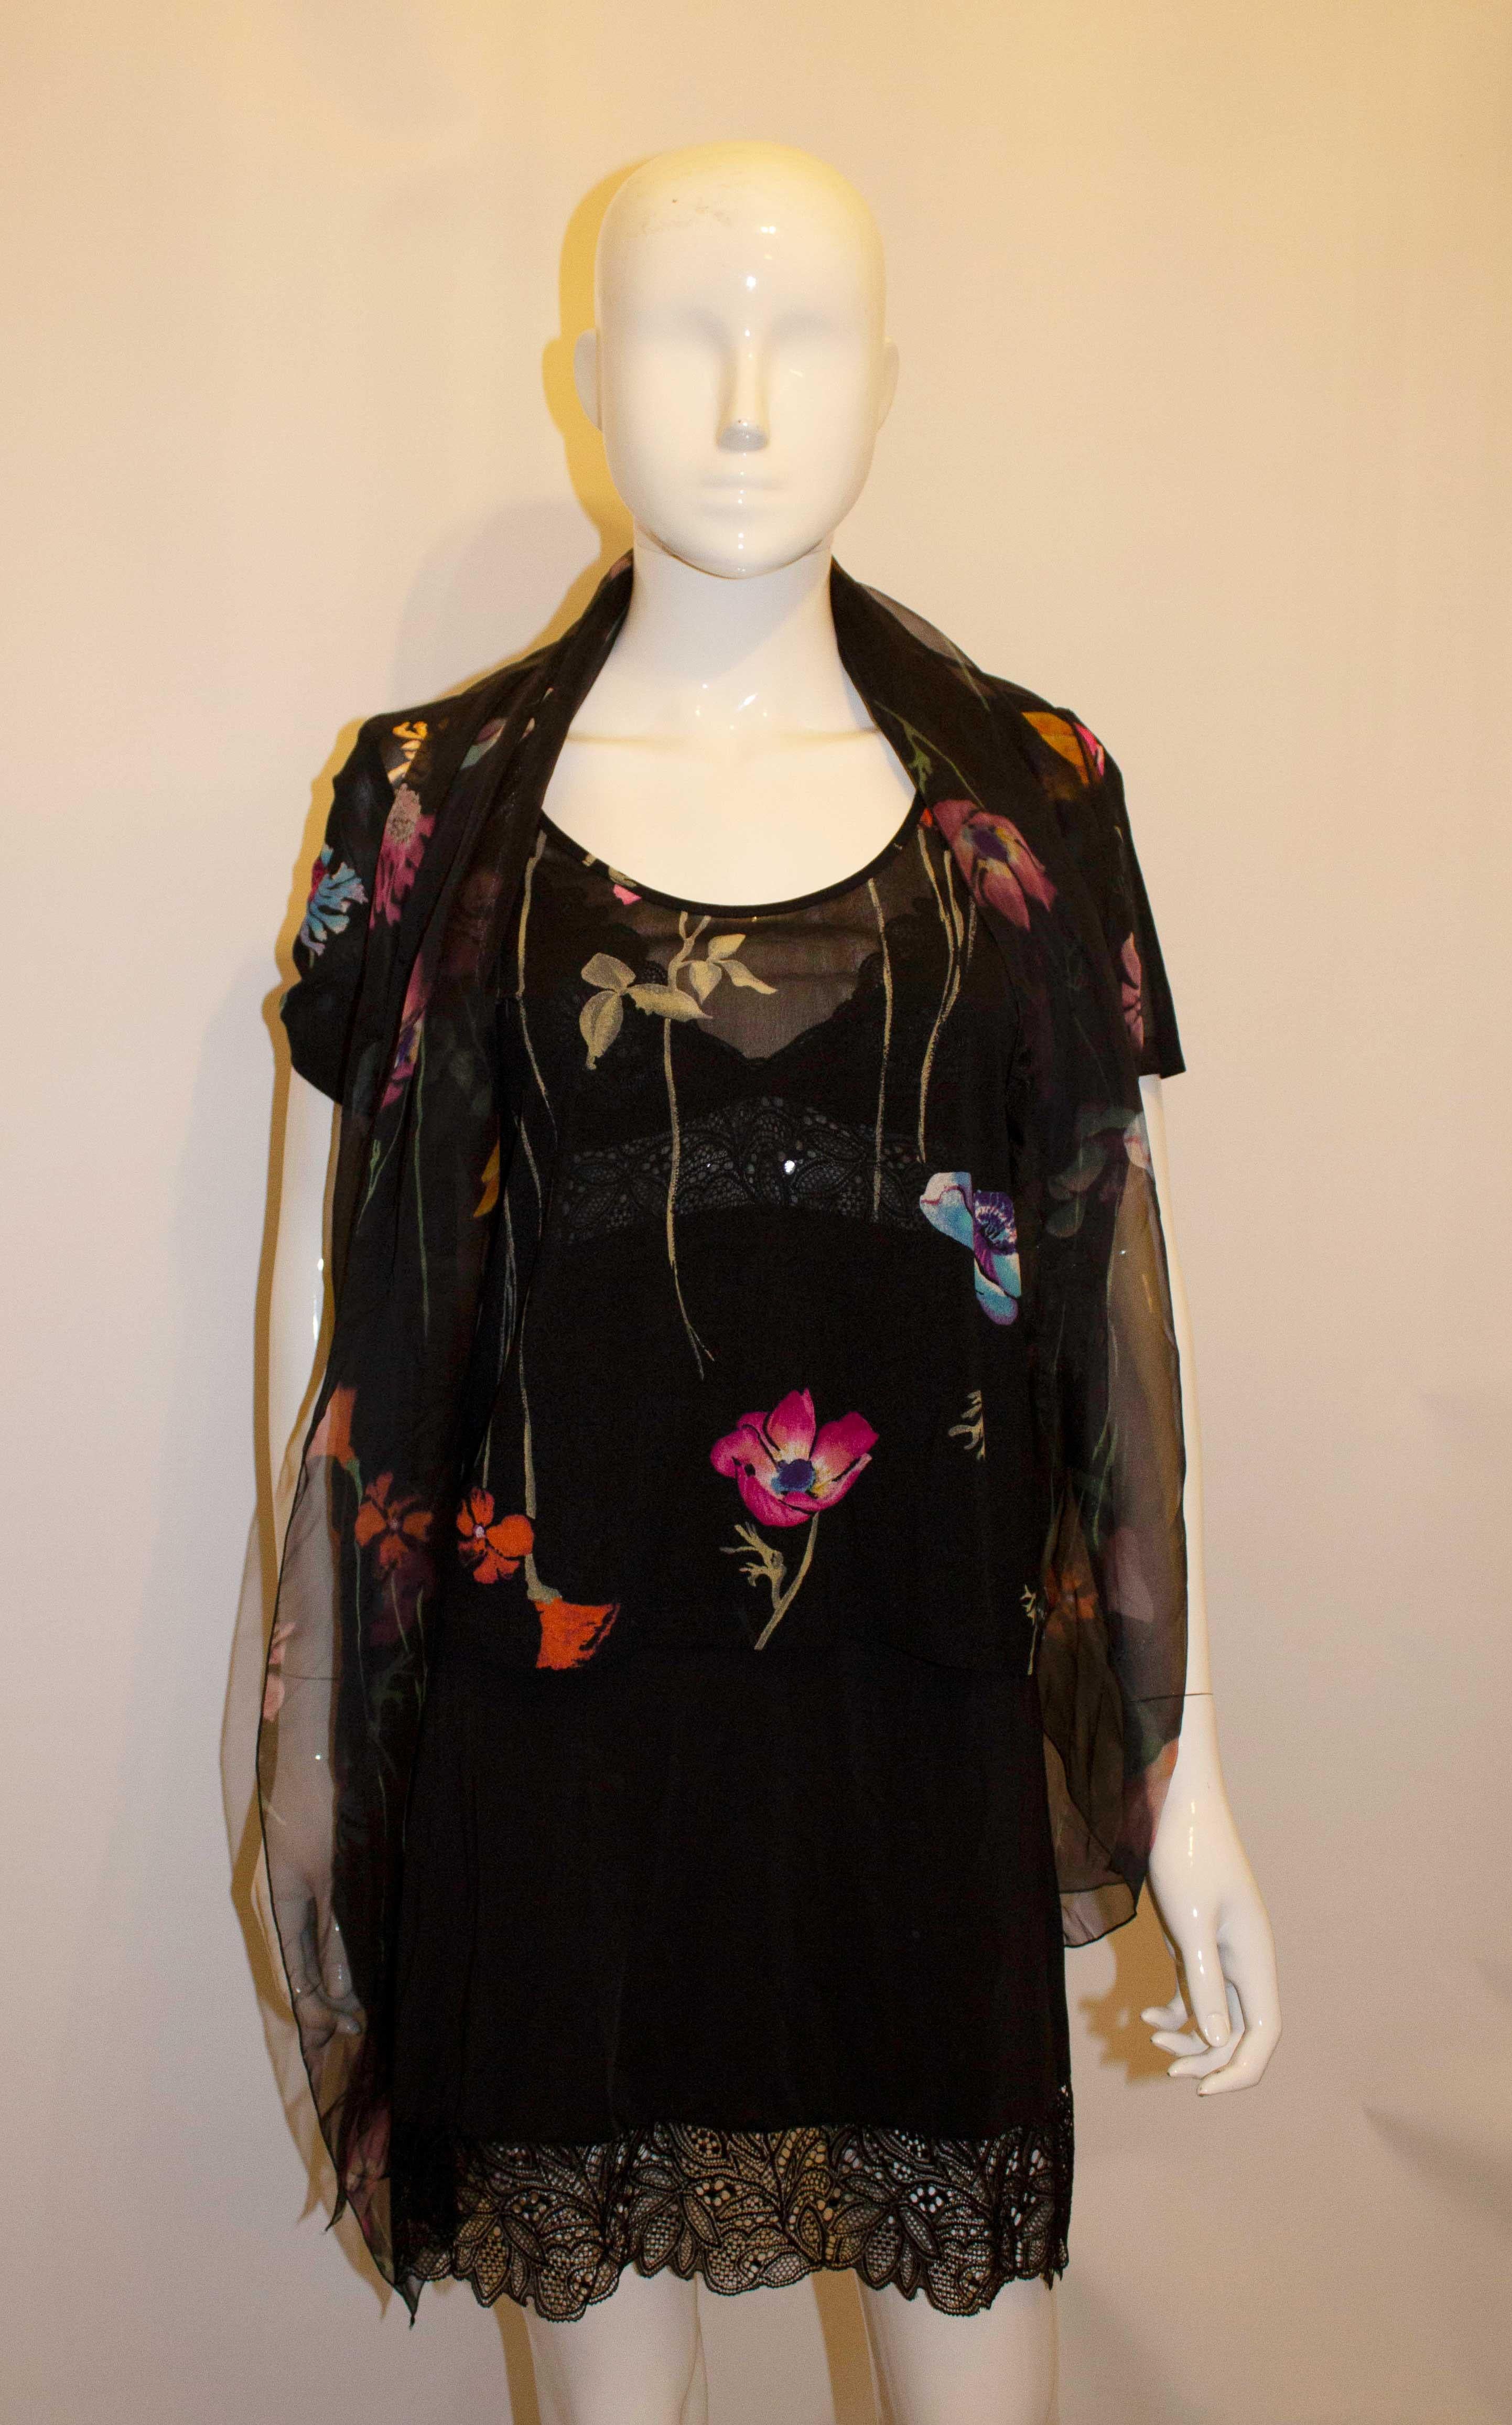 Kenzo Foral Print Top with Matching Scarf In Good Condition For Sale In London, GB